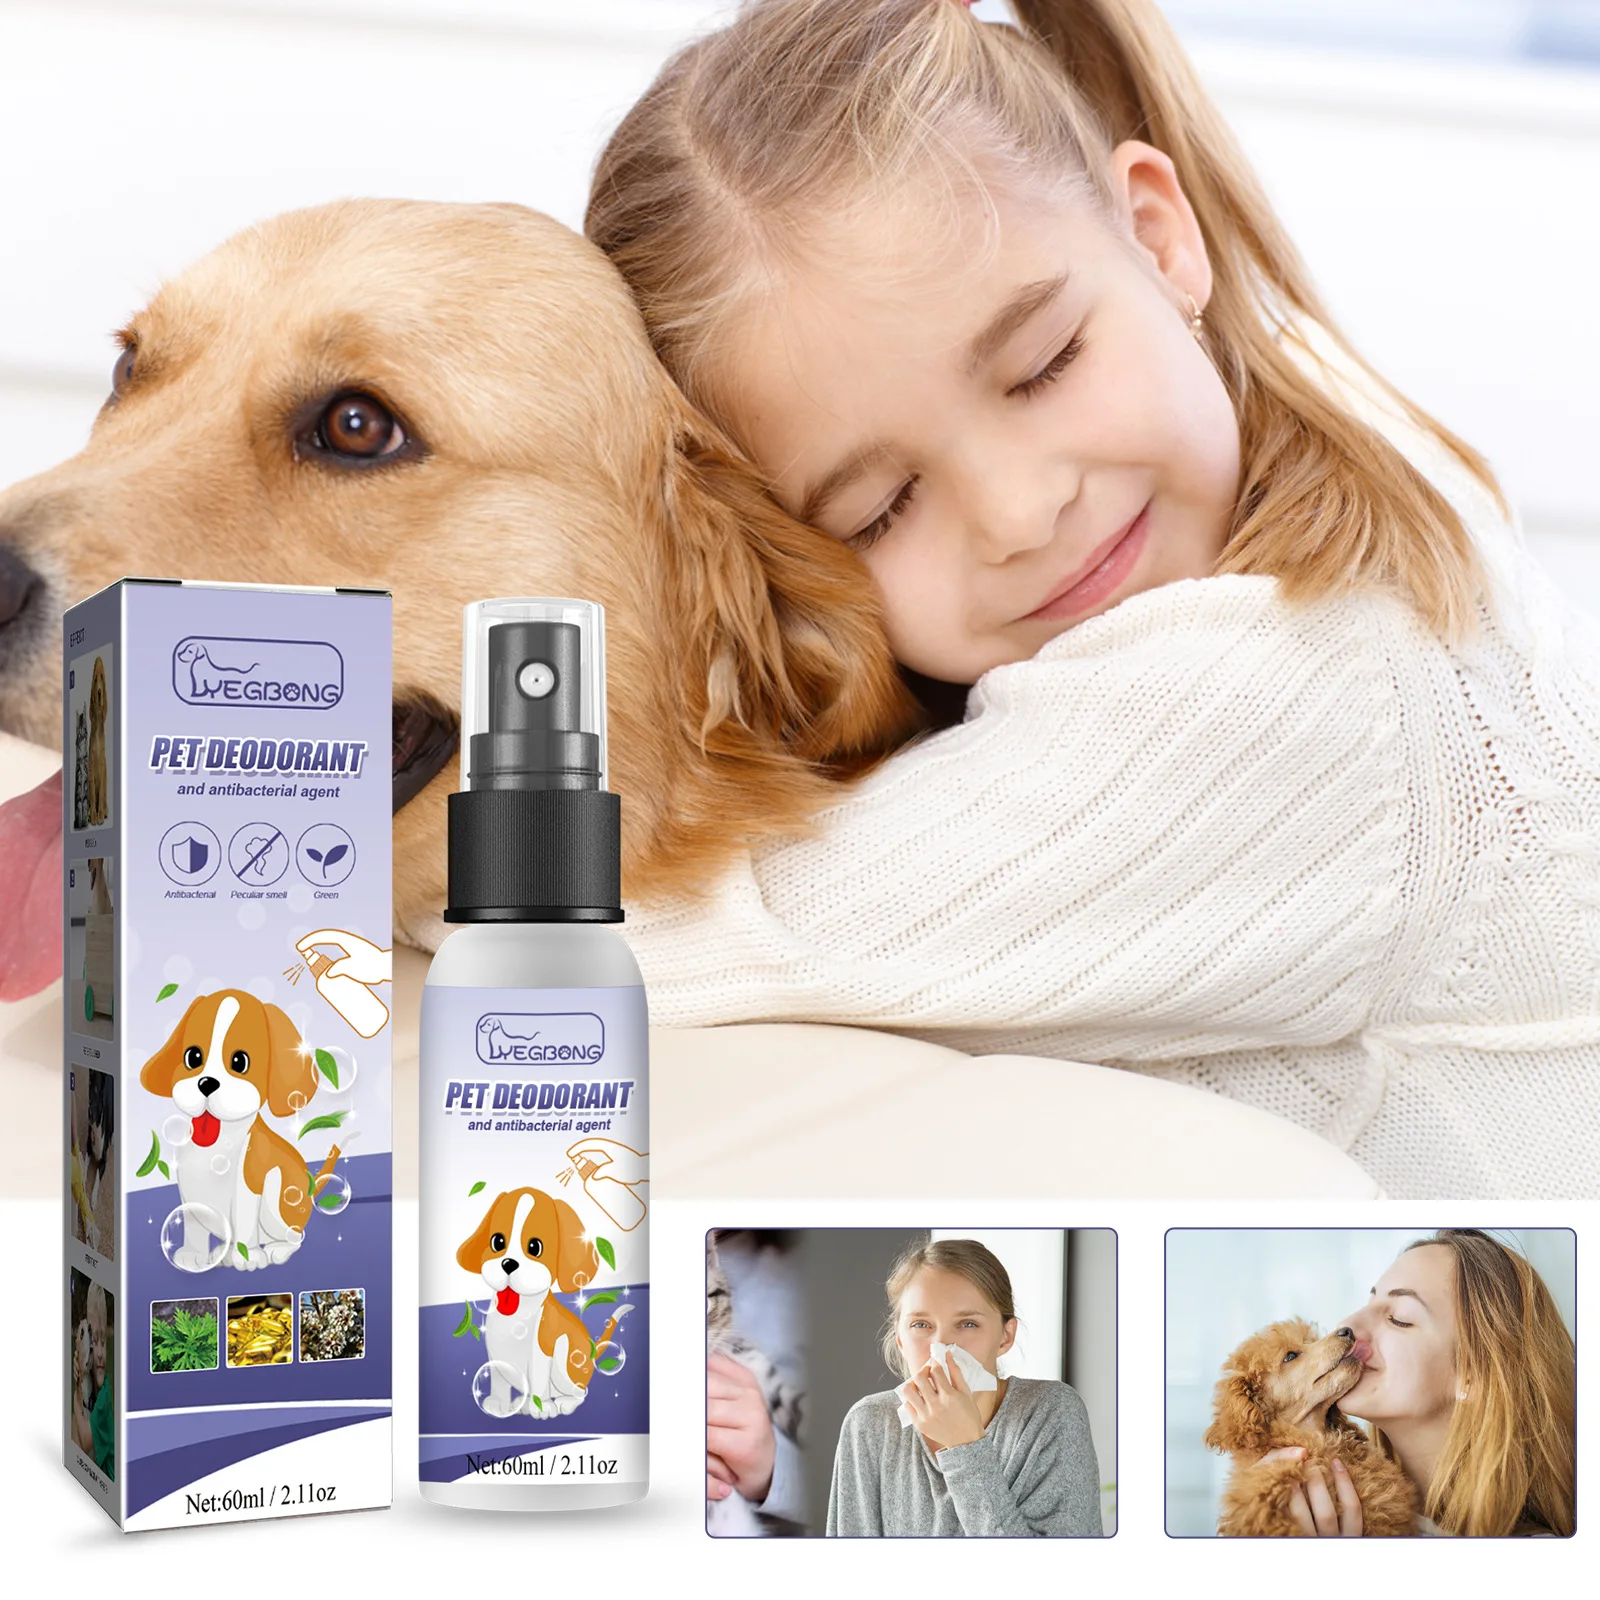 

60ml Dog Cat Deodorant Natural Plant Formula Pet Liquid Perfume Spray To Make Your Puppy Smell Great Long-Lasting Clean Perfume